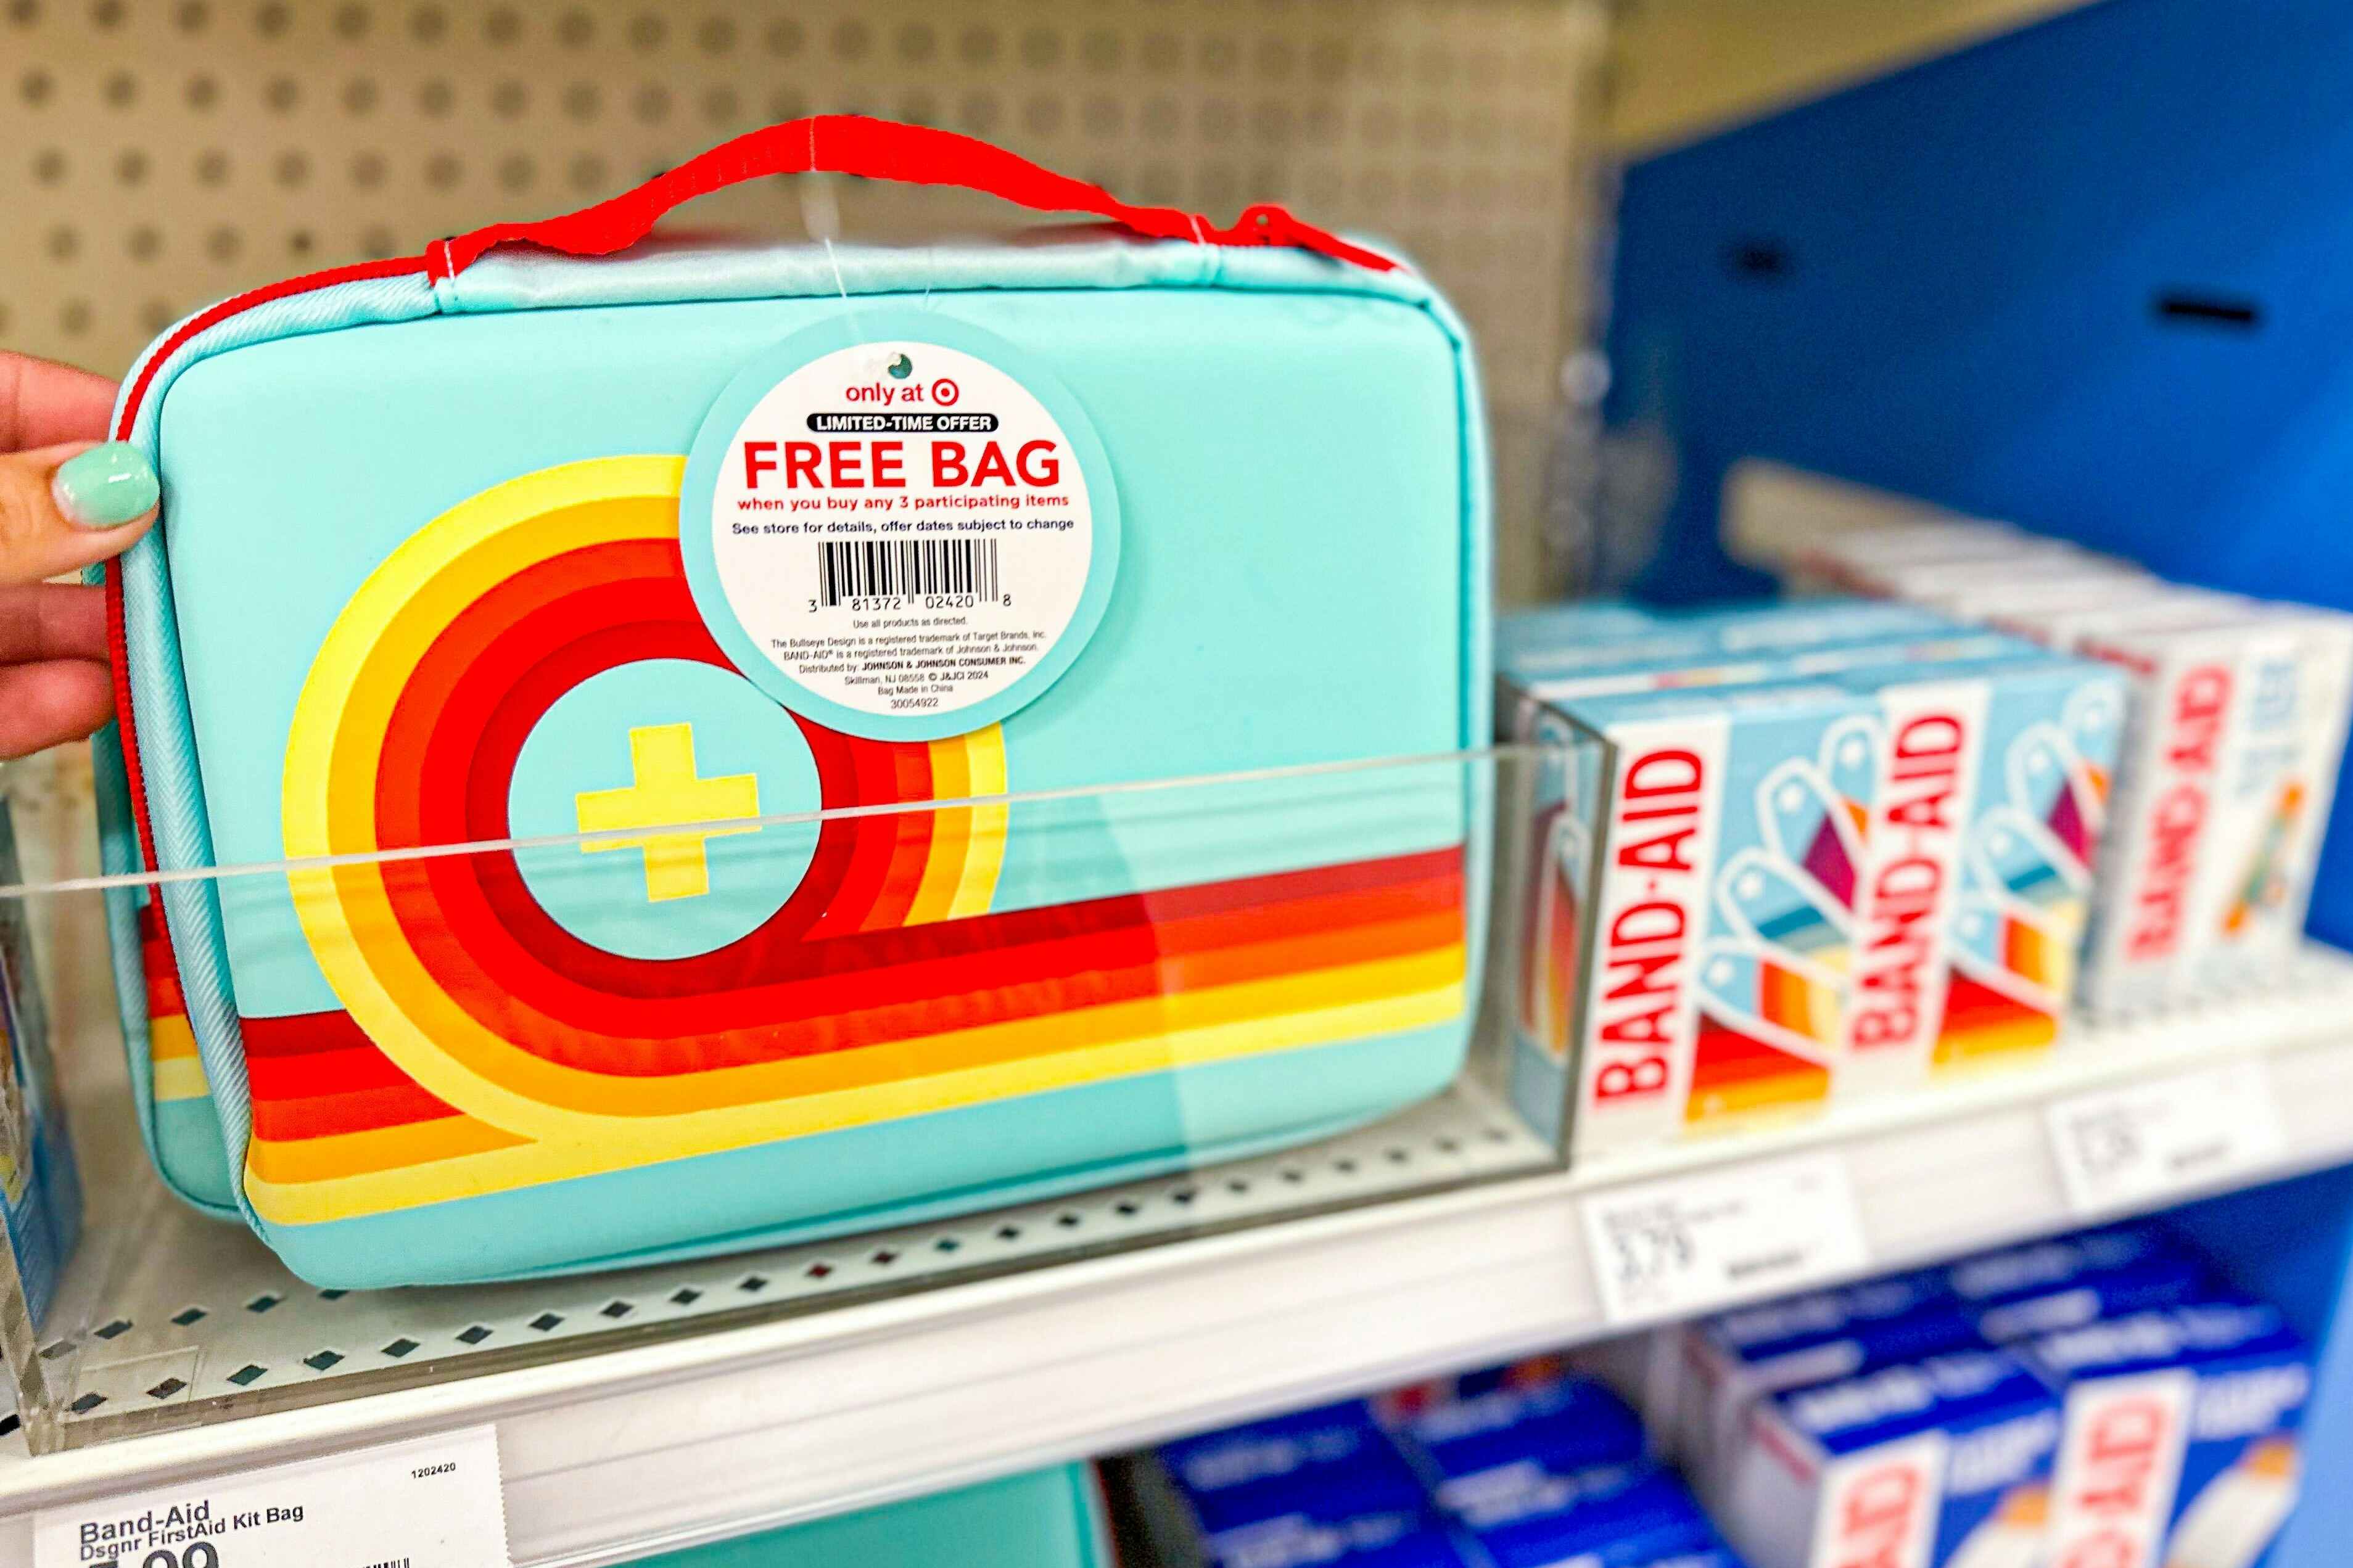 Free First Aid Bag With First Aid Supply Purchase at Target